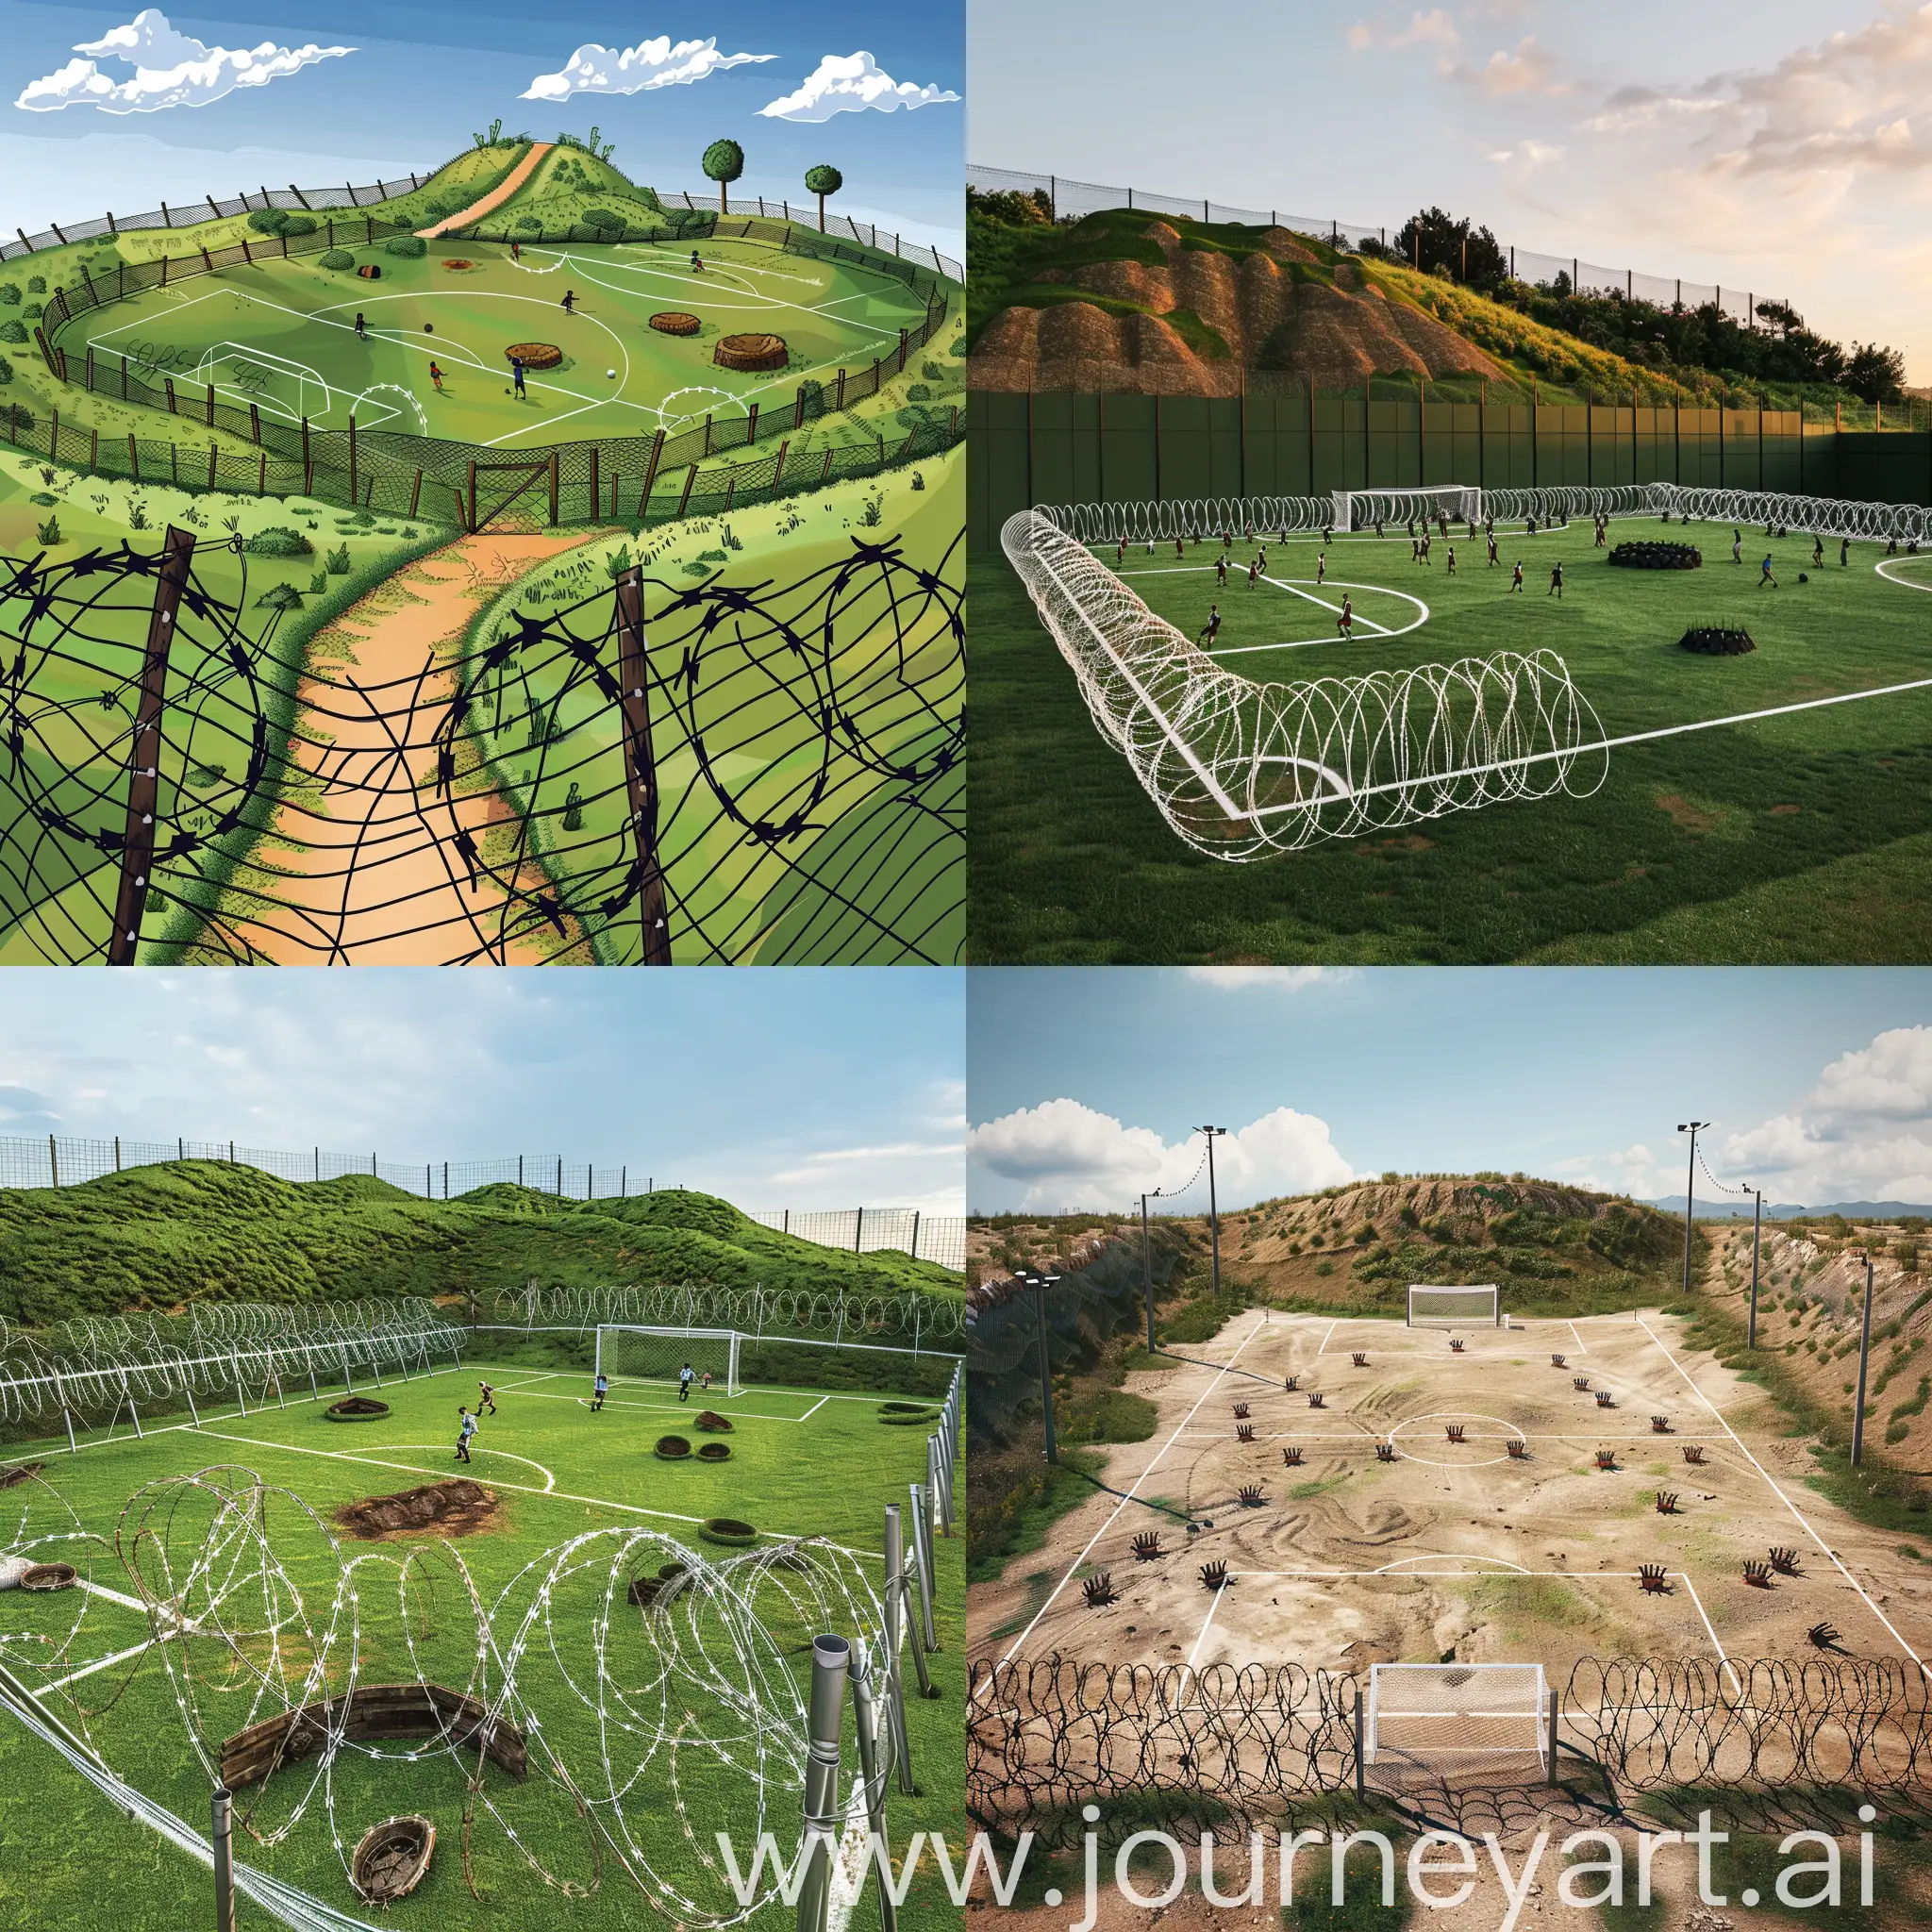 A soccer field with obstacles for players, hill, barbed wire, pit, trap